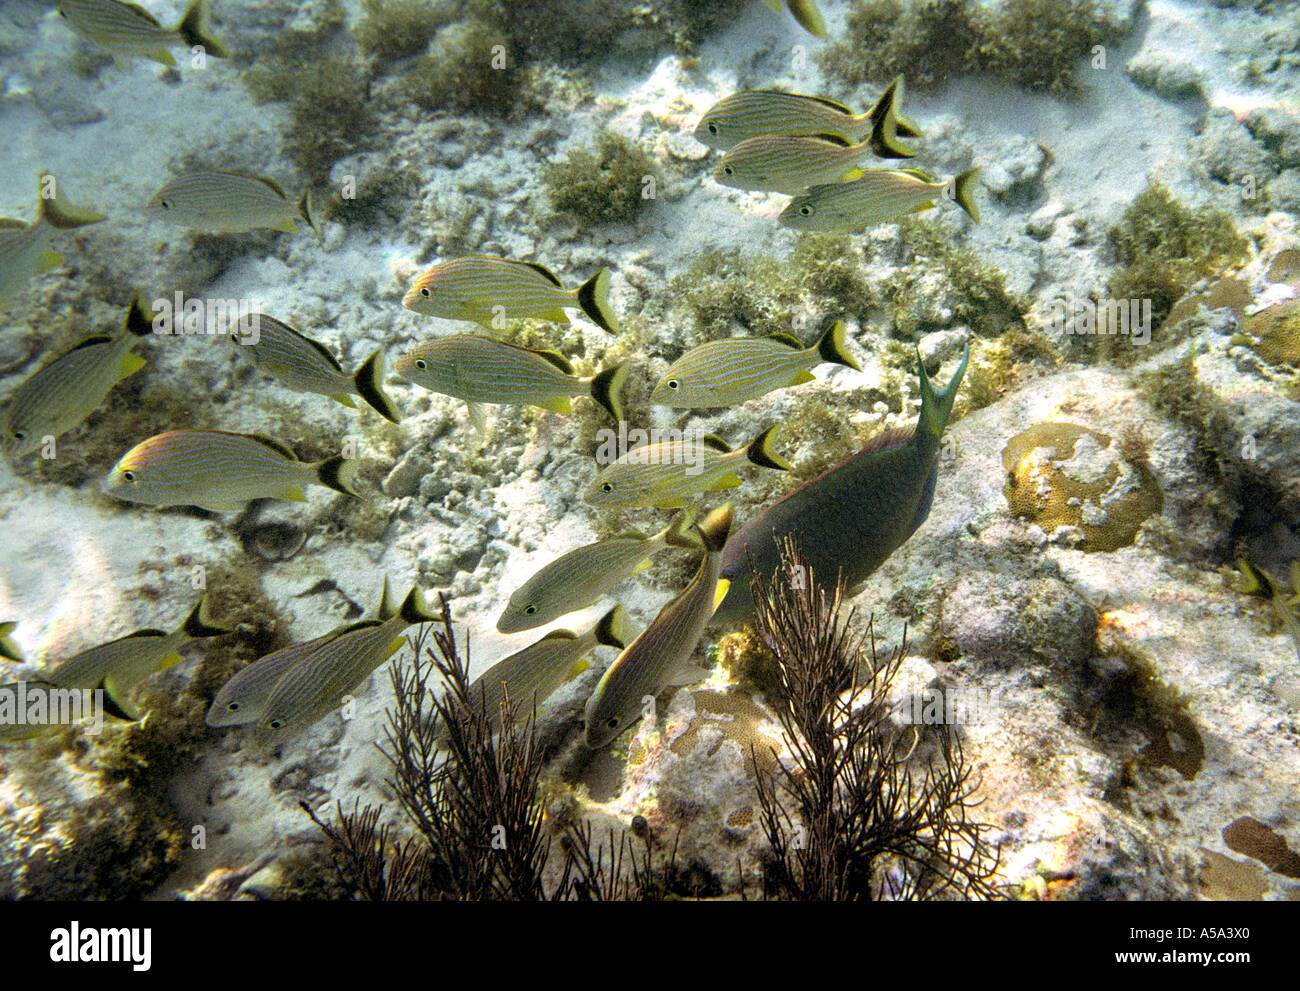 Belize Underwater Hol Chan marine national park Blue striped Grunts with Stoplight Parrotfish Stock Photo